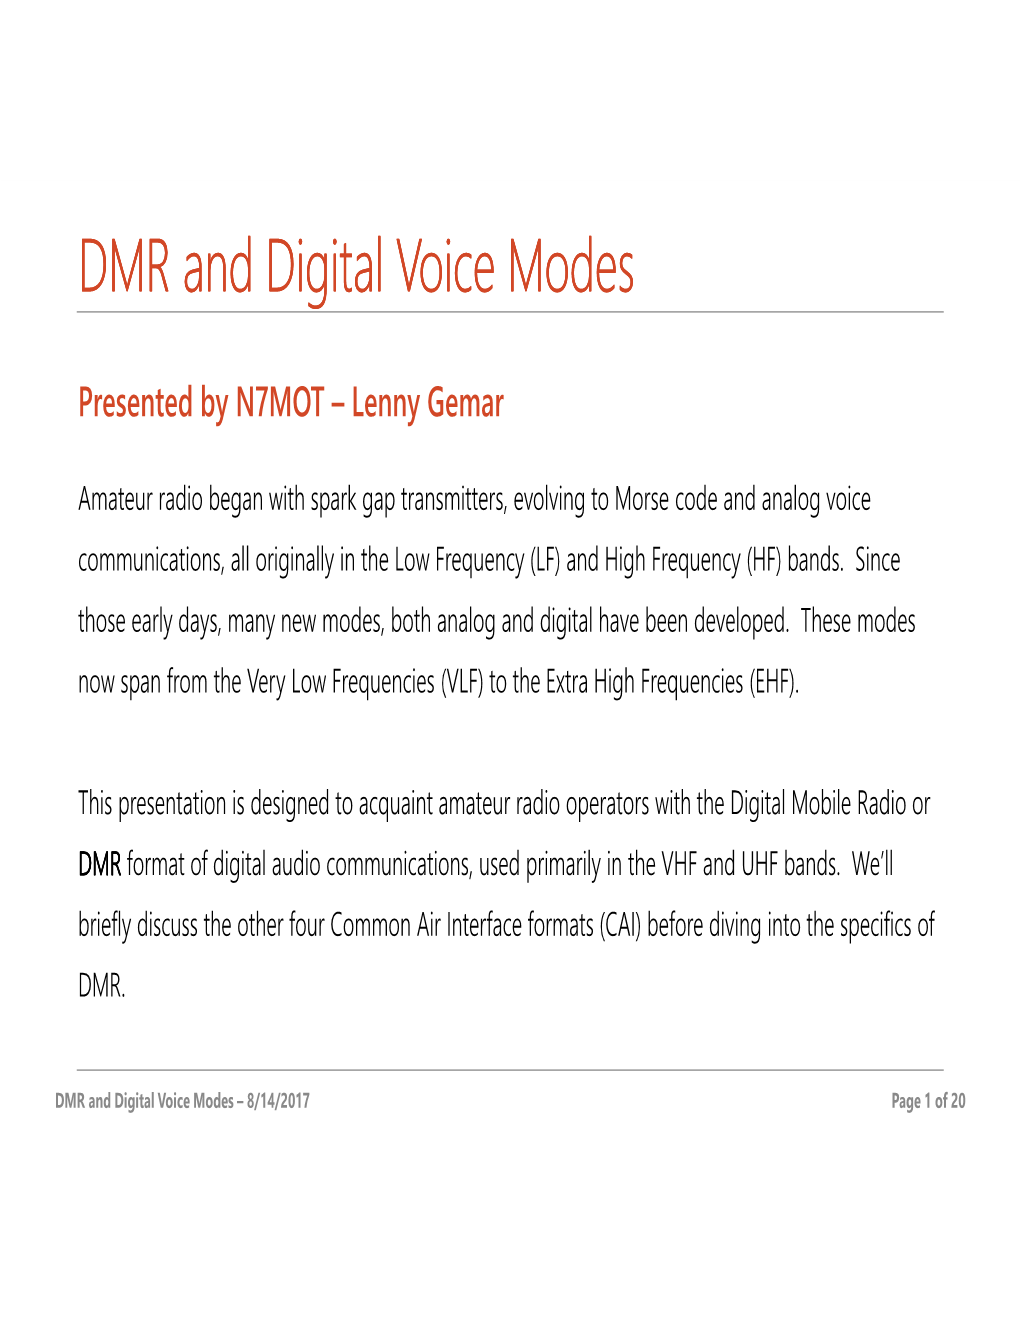 DMR and Digital Voice Modes